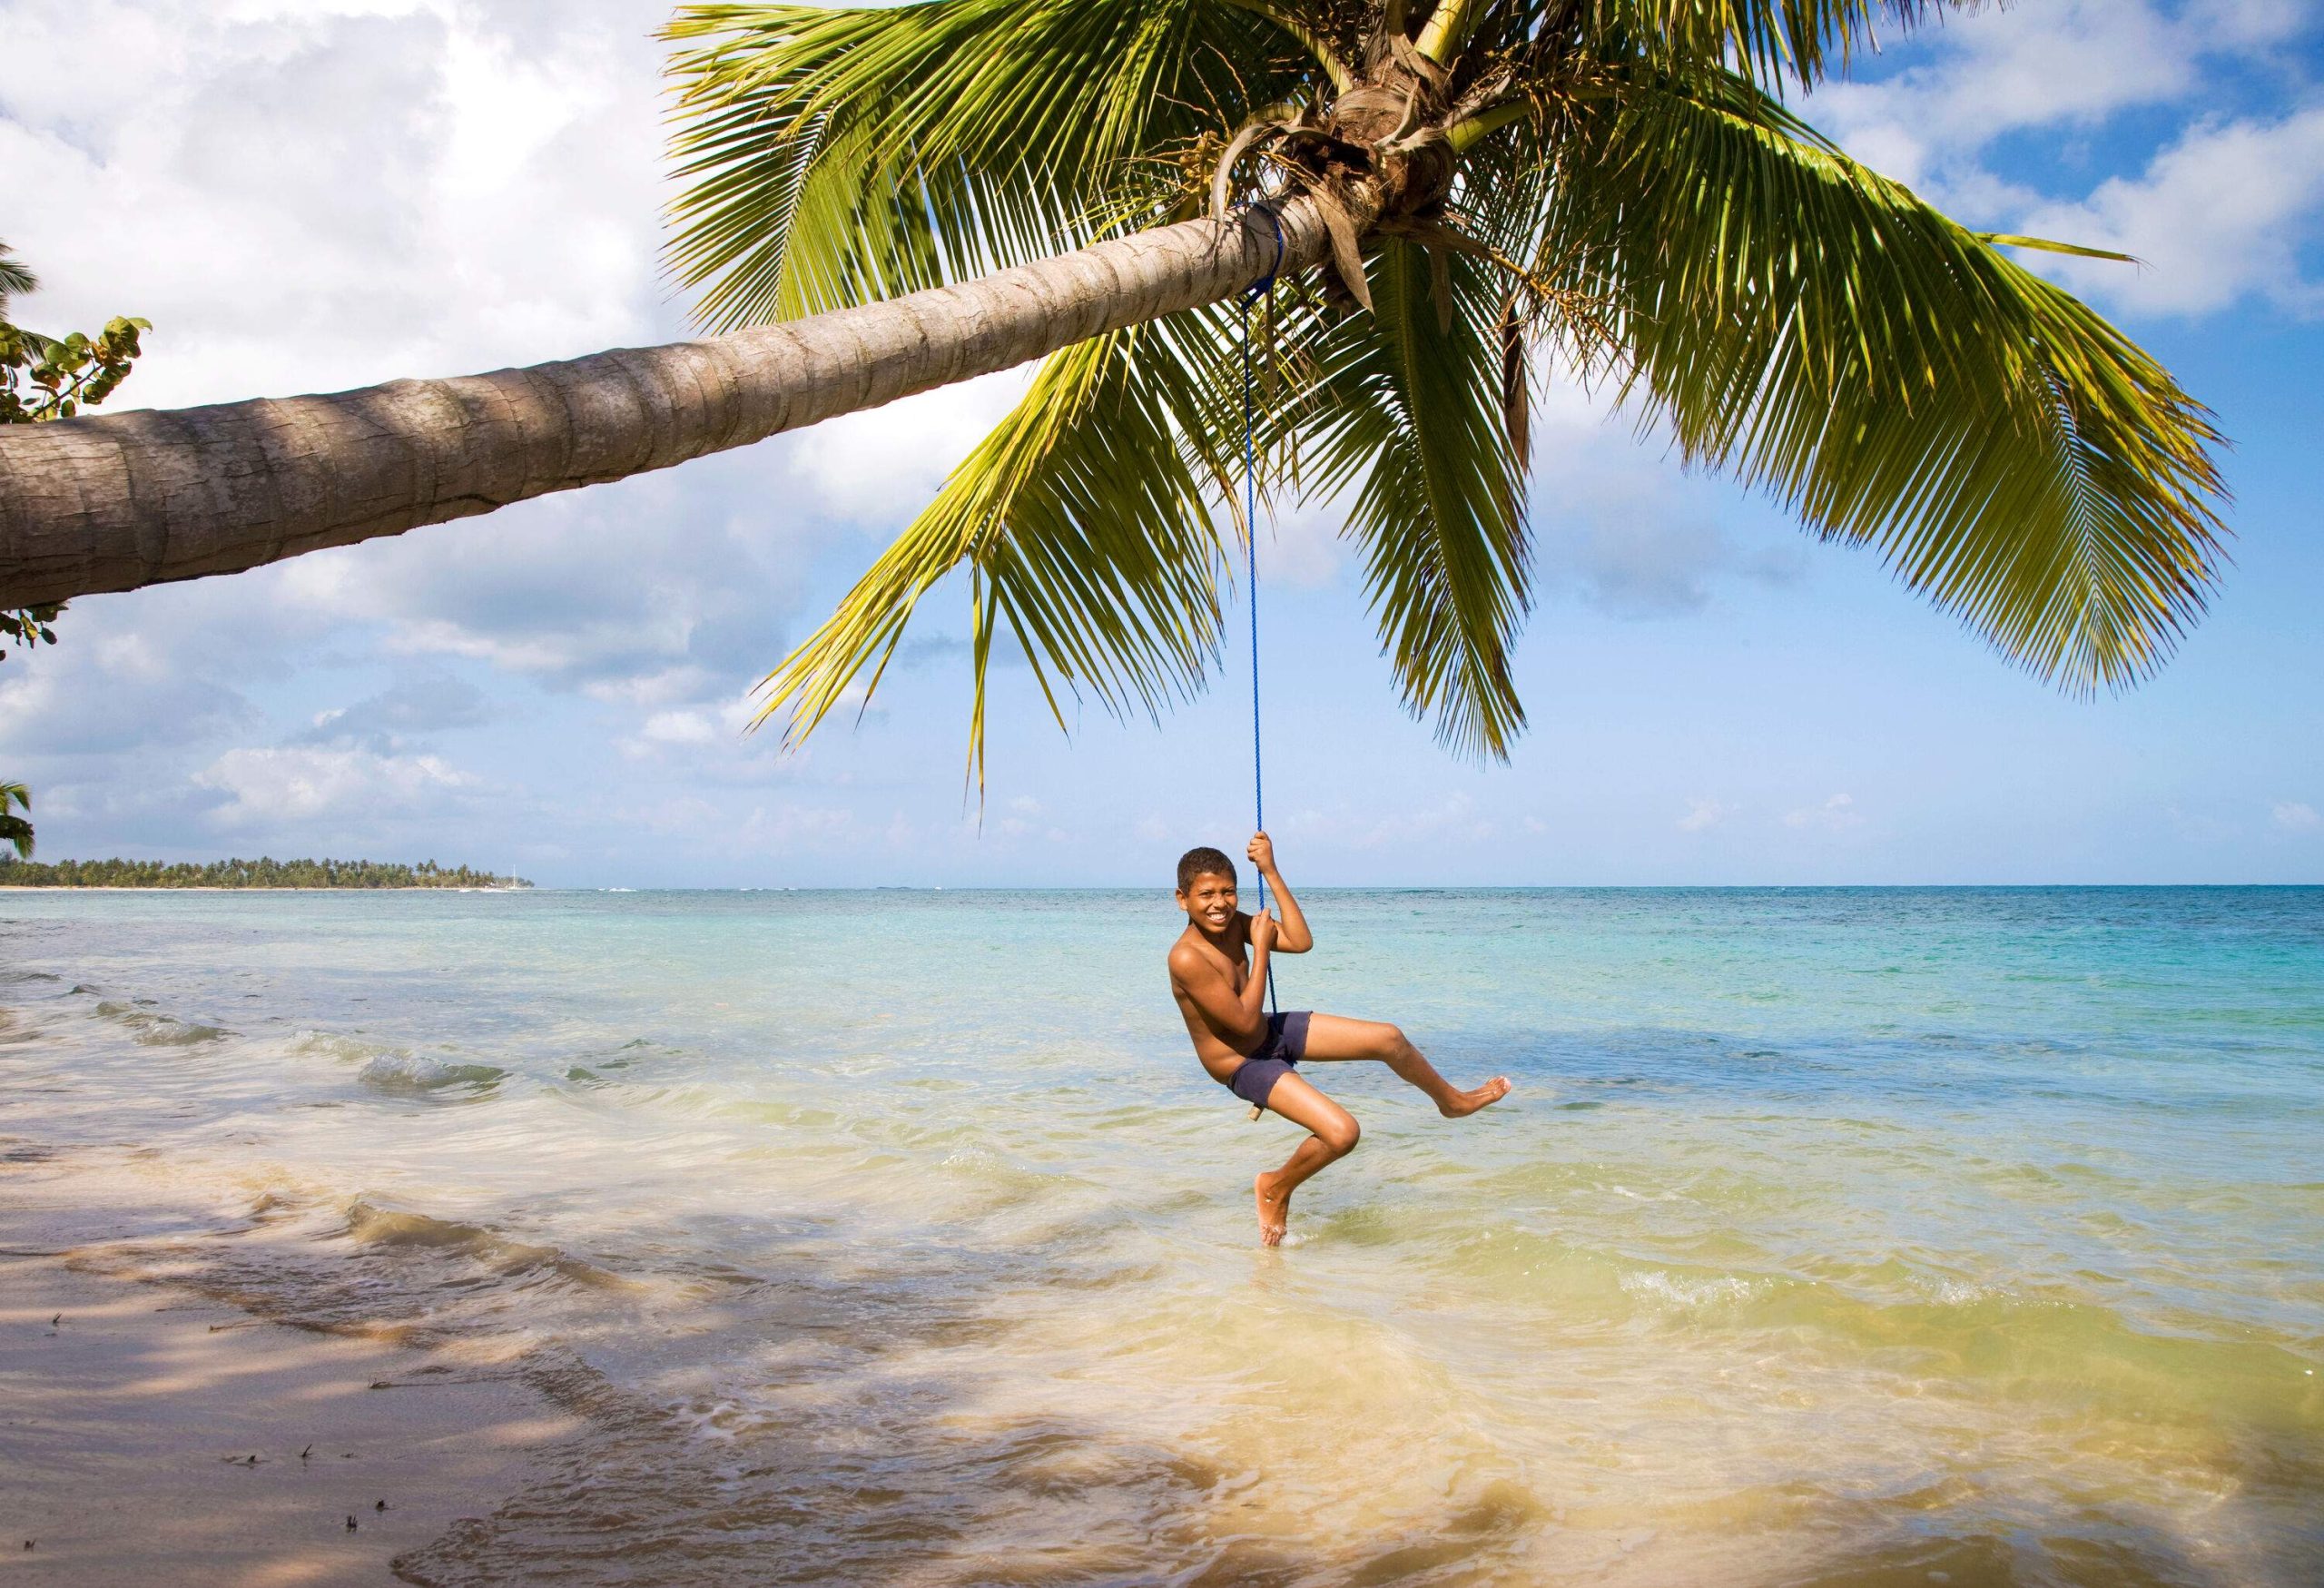 Boy hanging over a palm tree by a Caribbean beach smiling at the camera